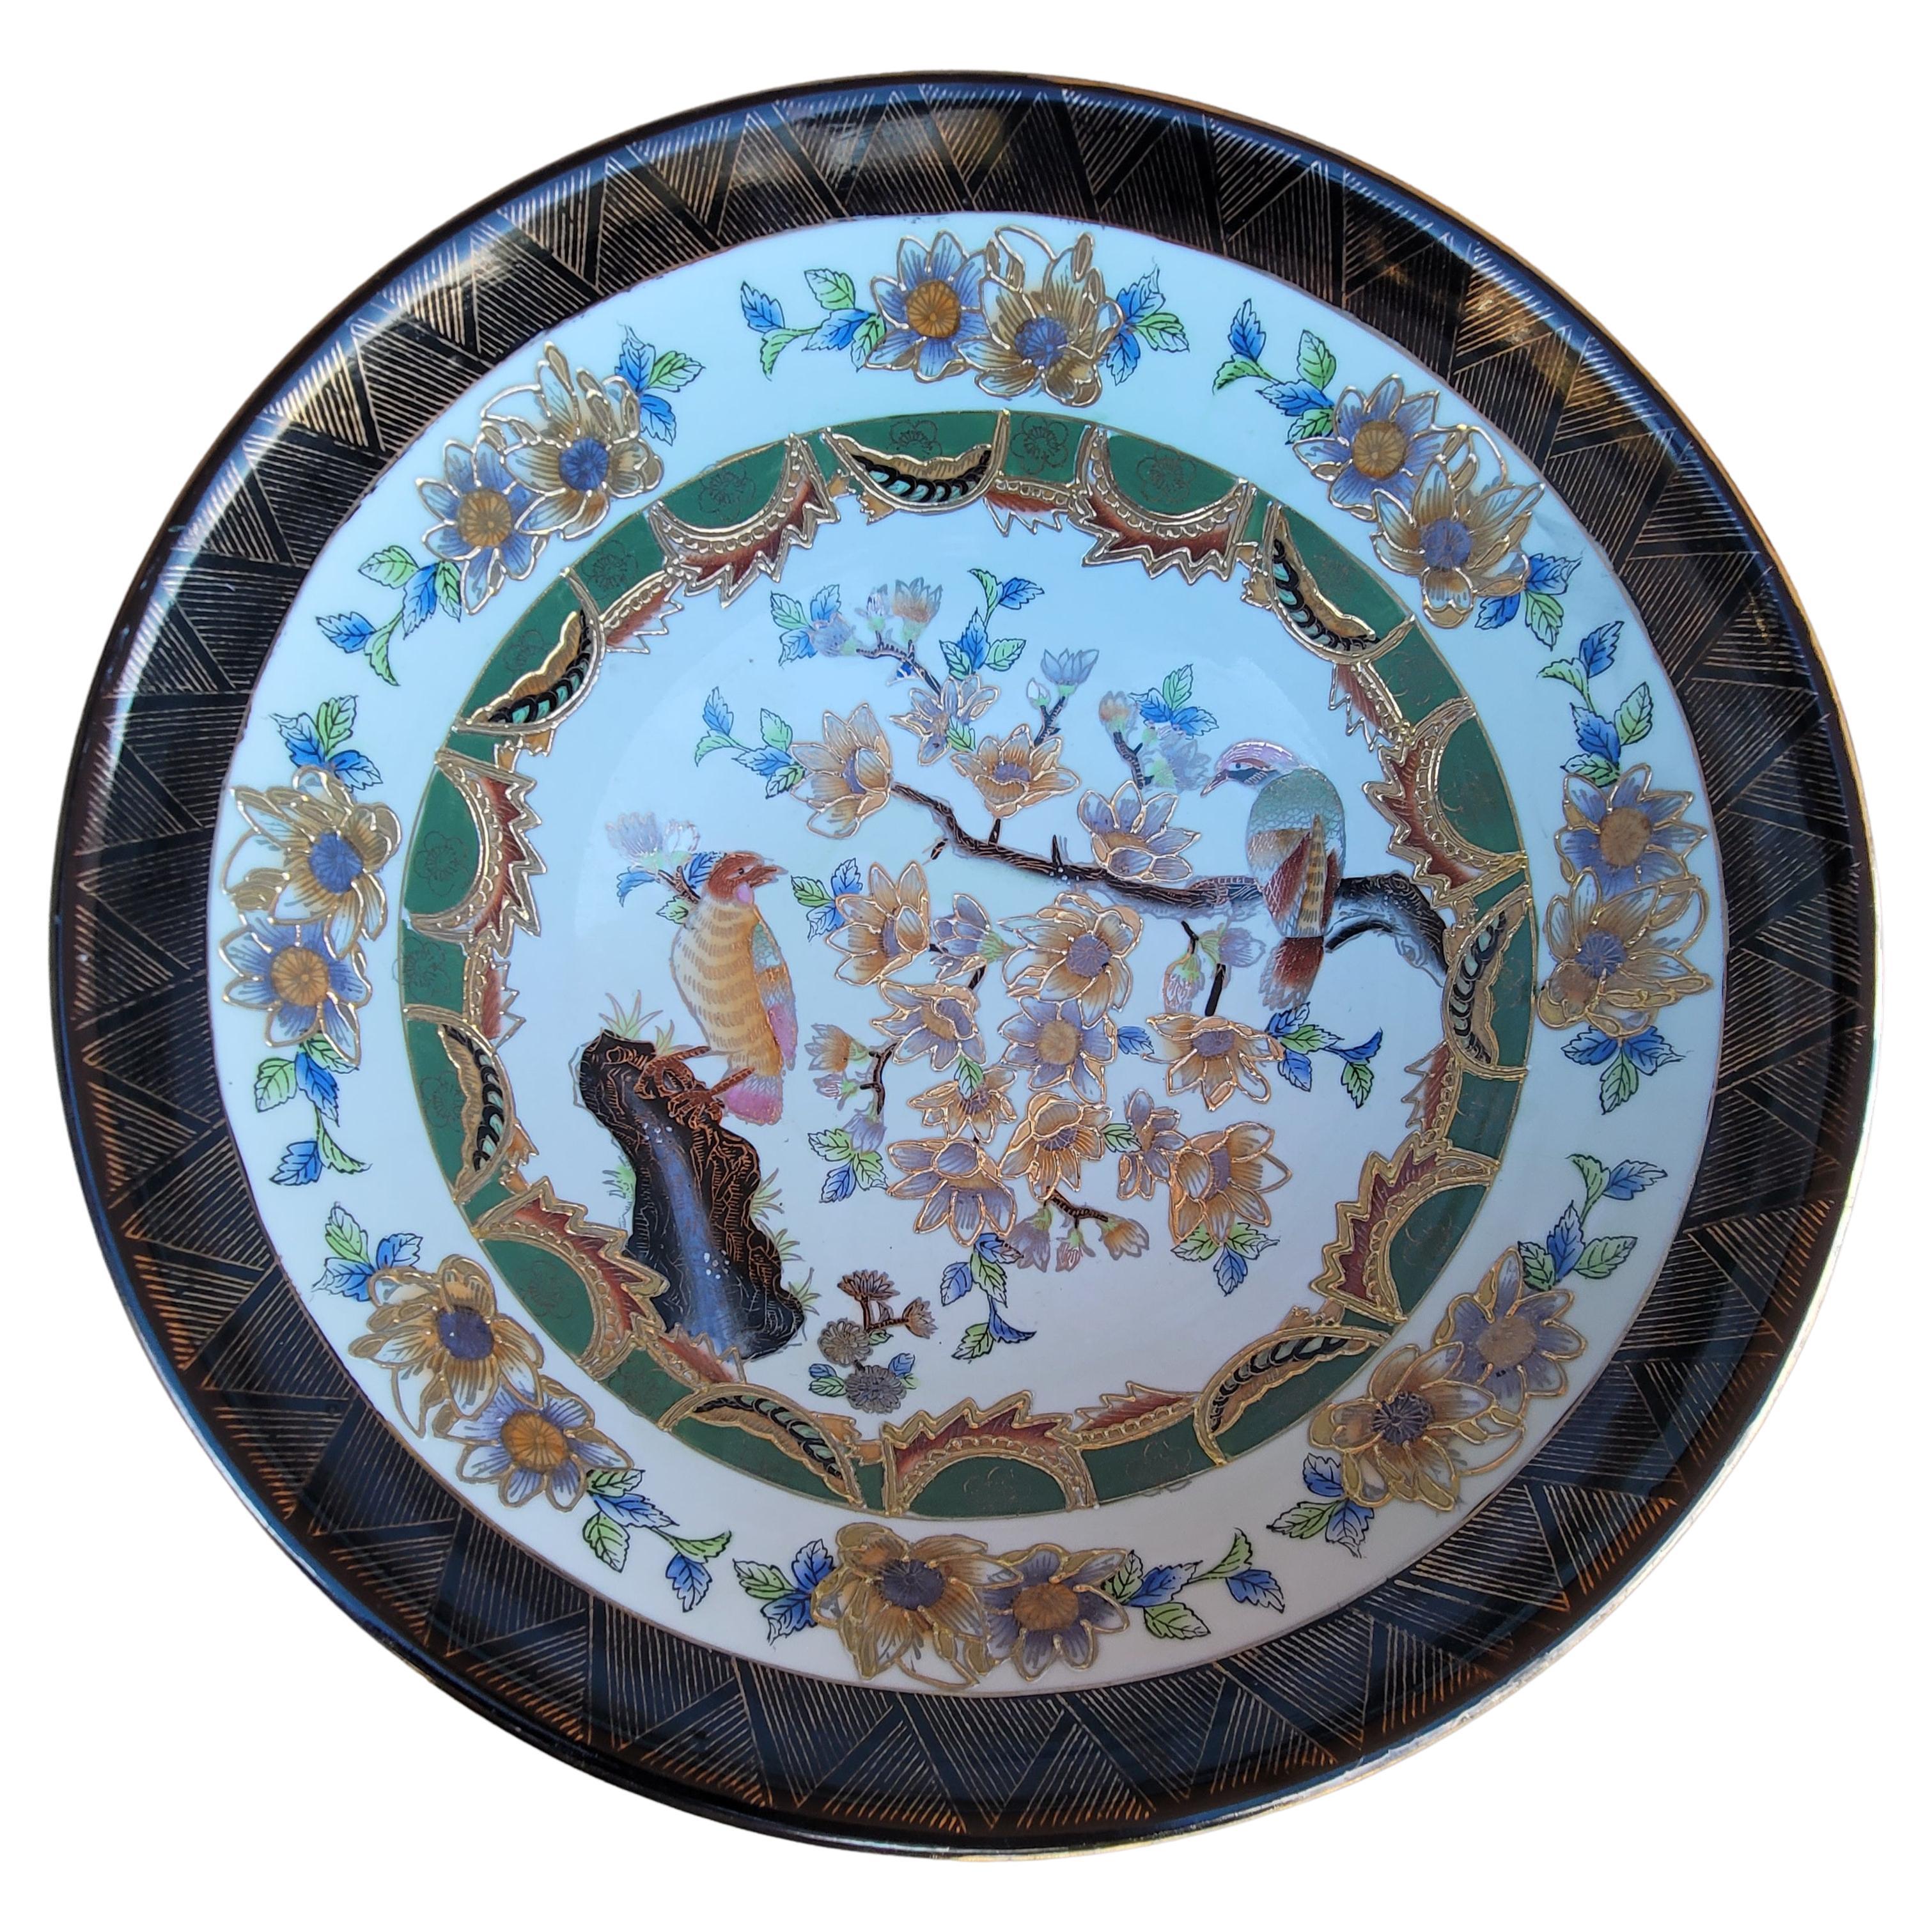 20th Century Large Hand-Painted Chinese Enamel And Gilt Decorated Porcelain Bowl For Sale